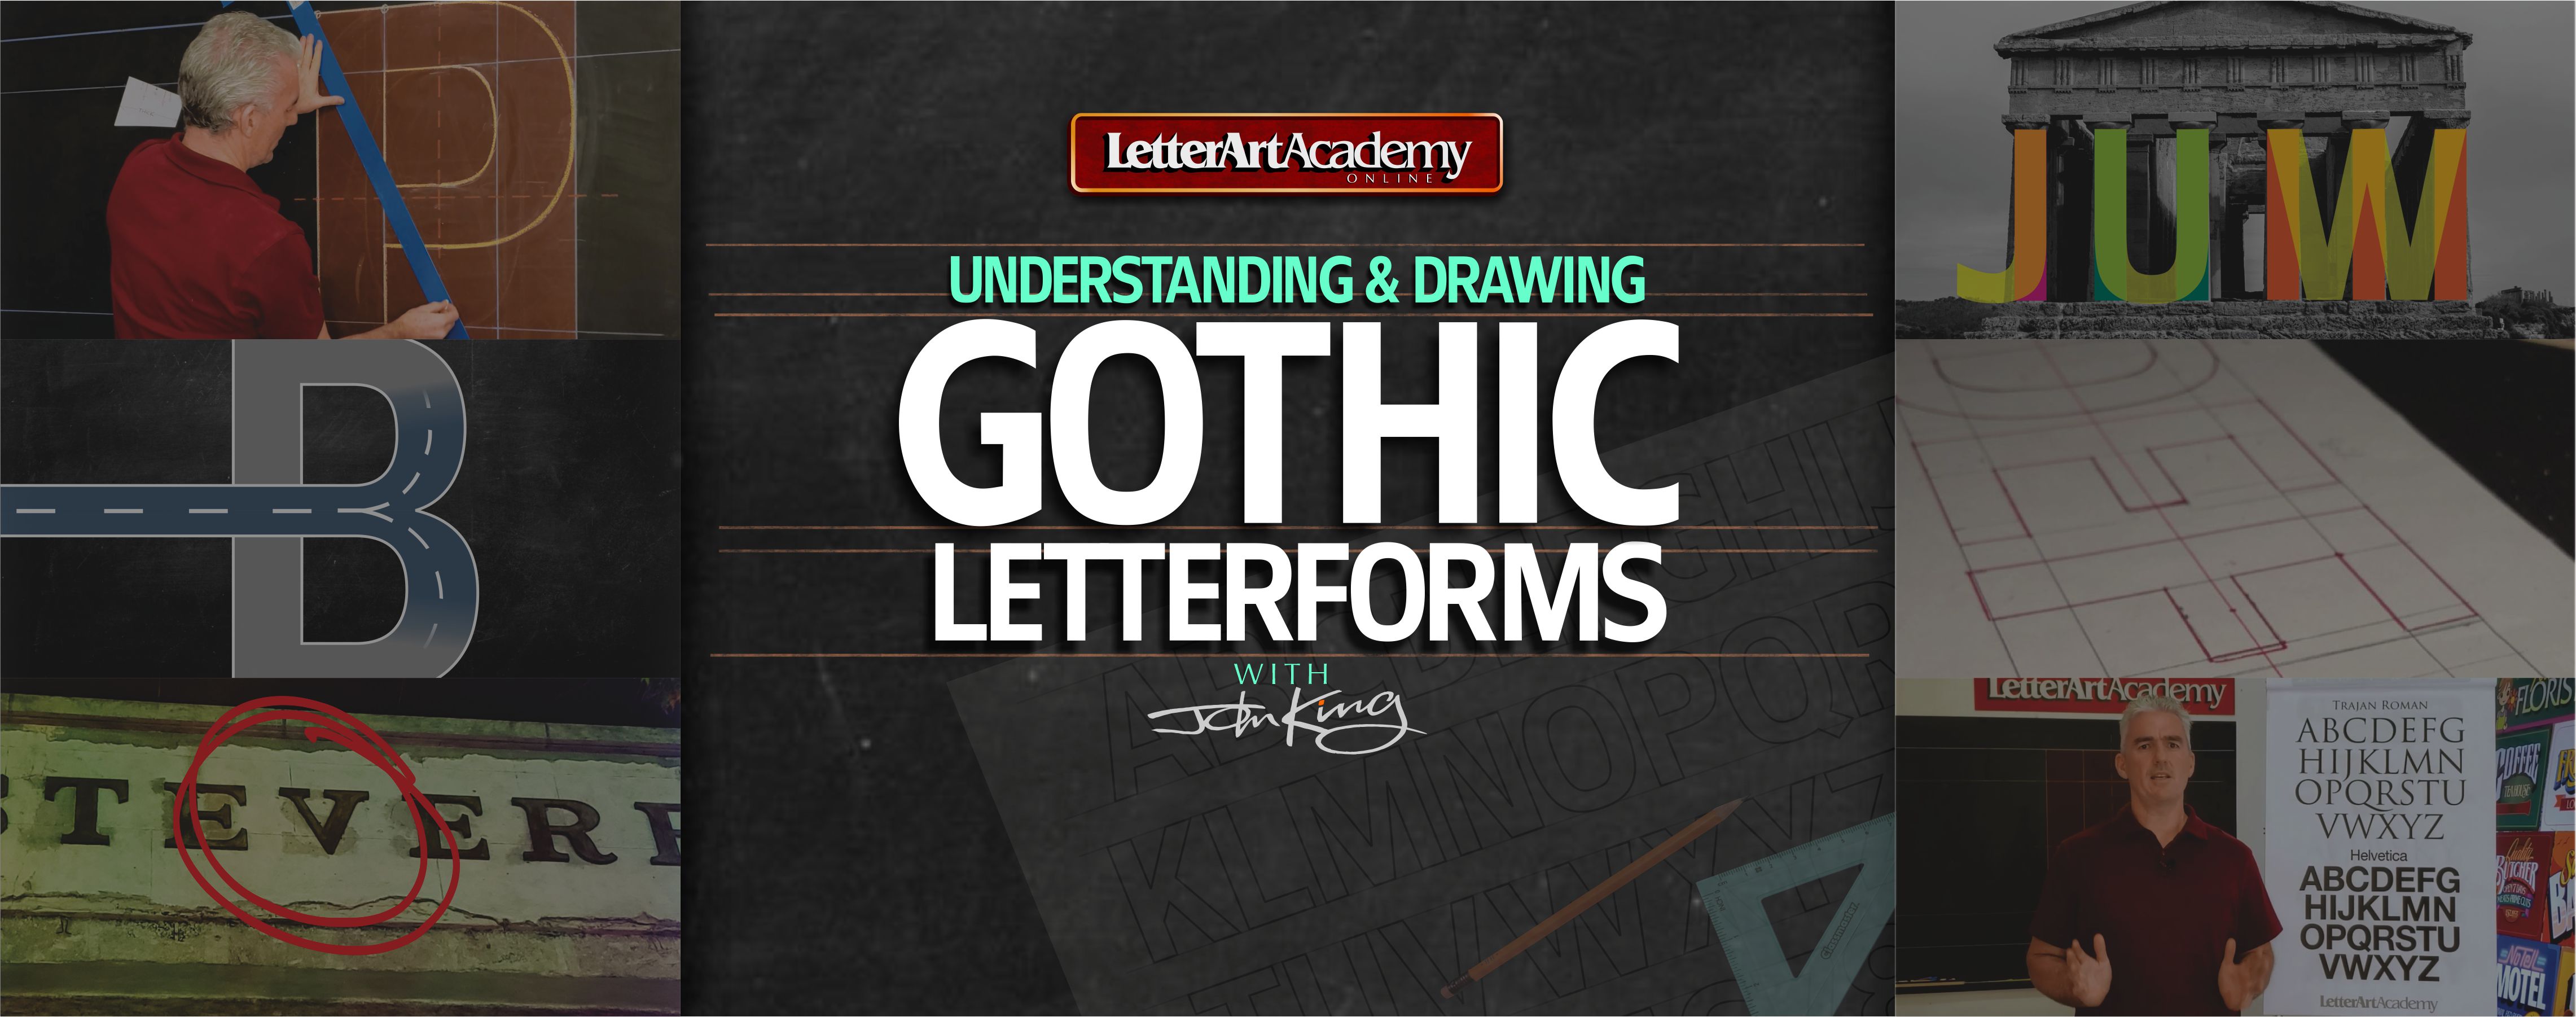 sign painting online course learn how to draw sans serif gothic lettering 